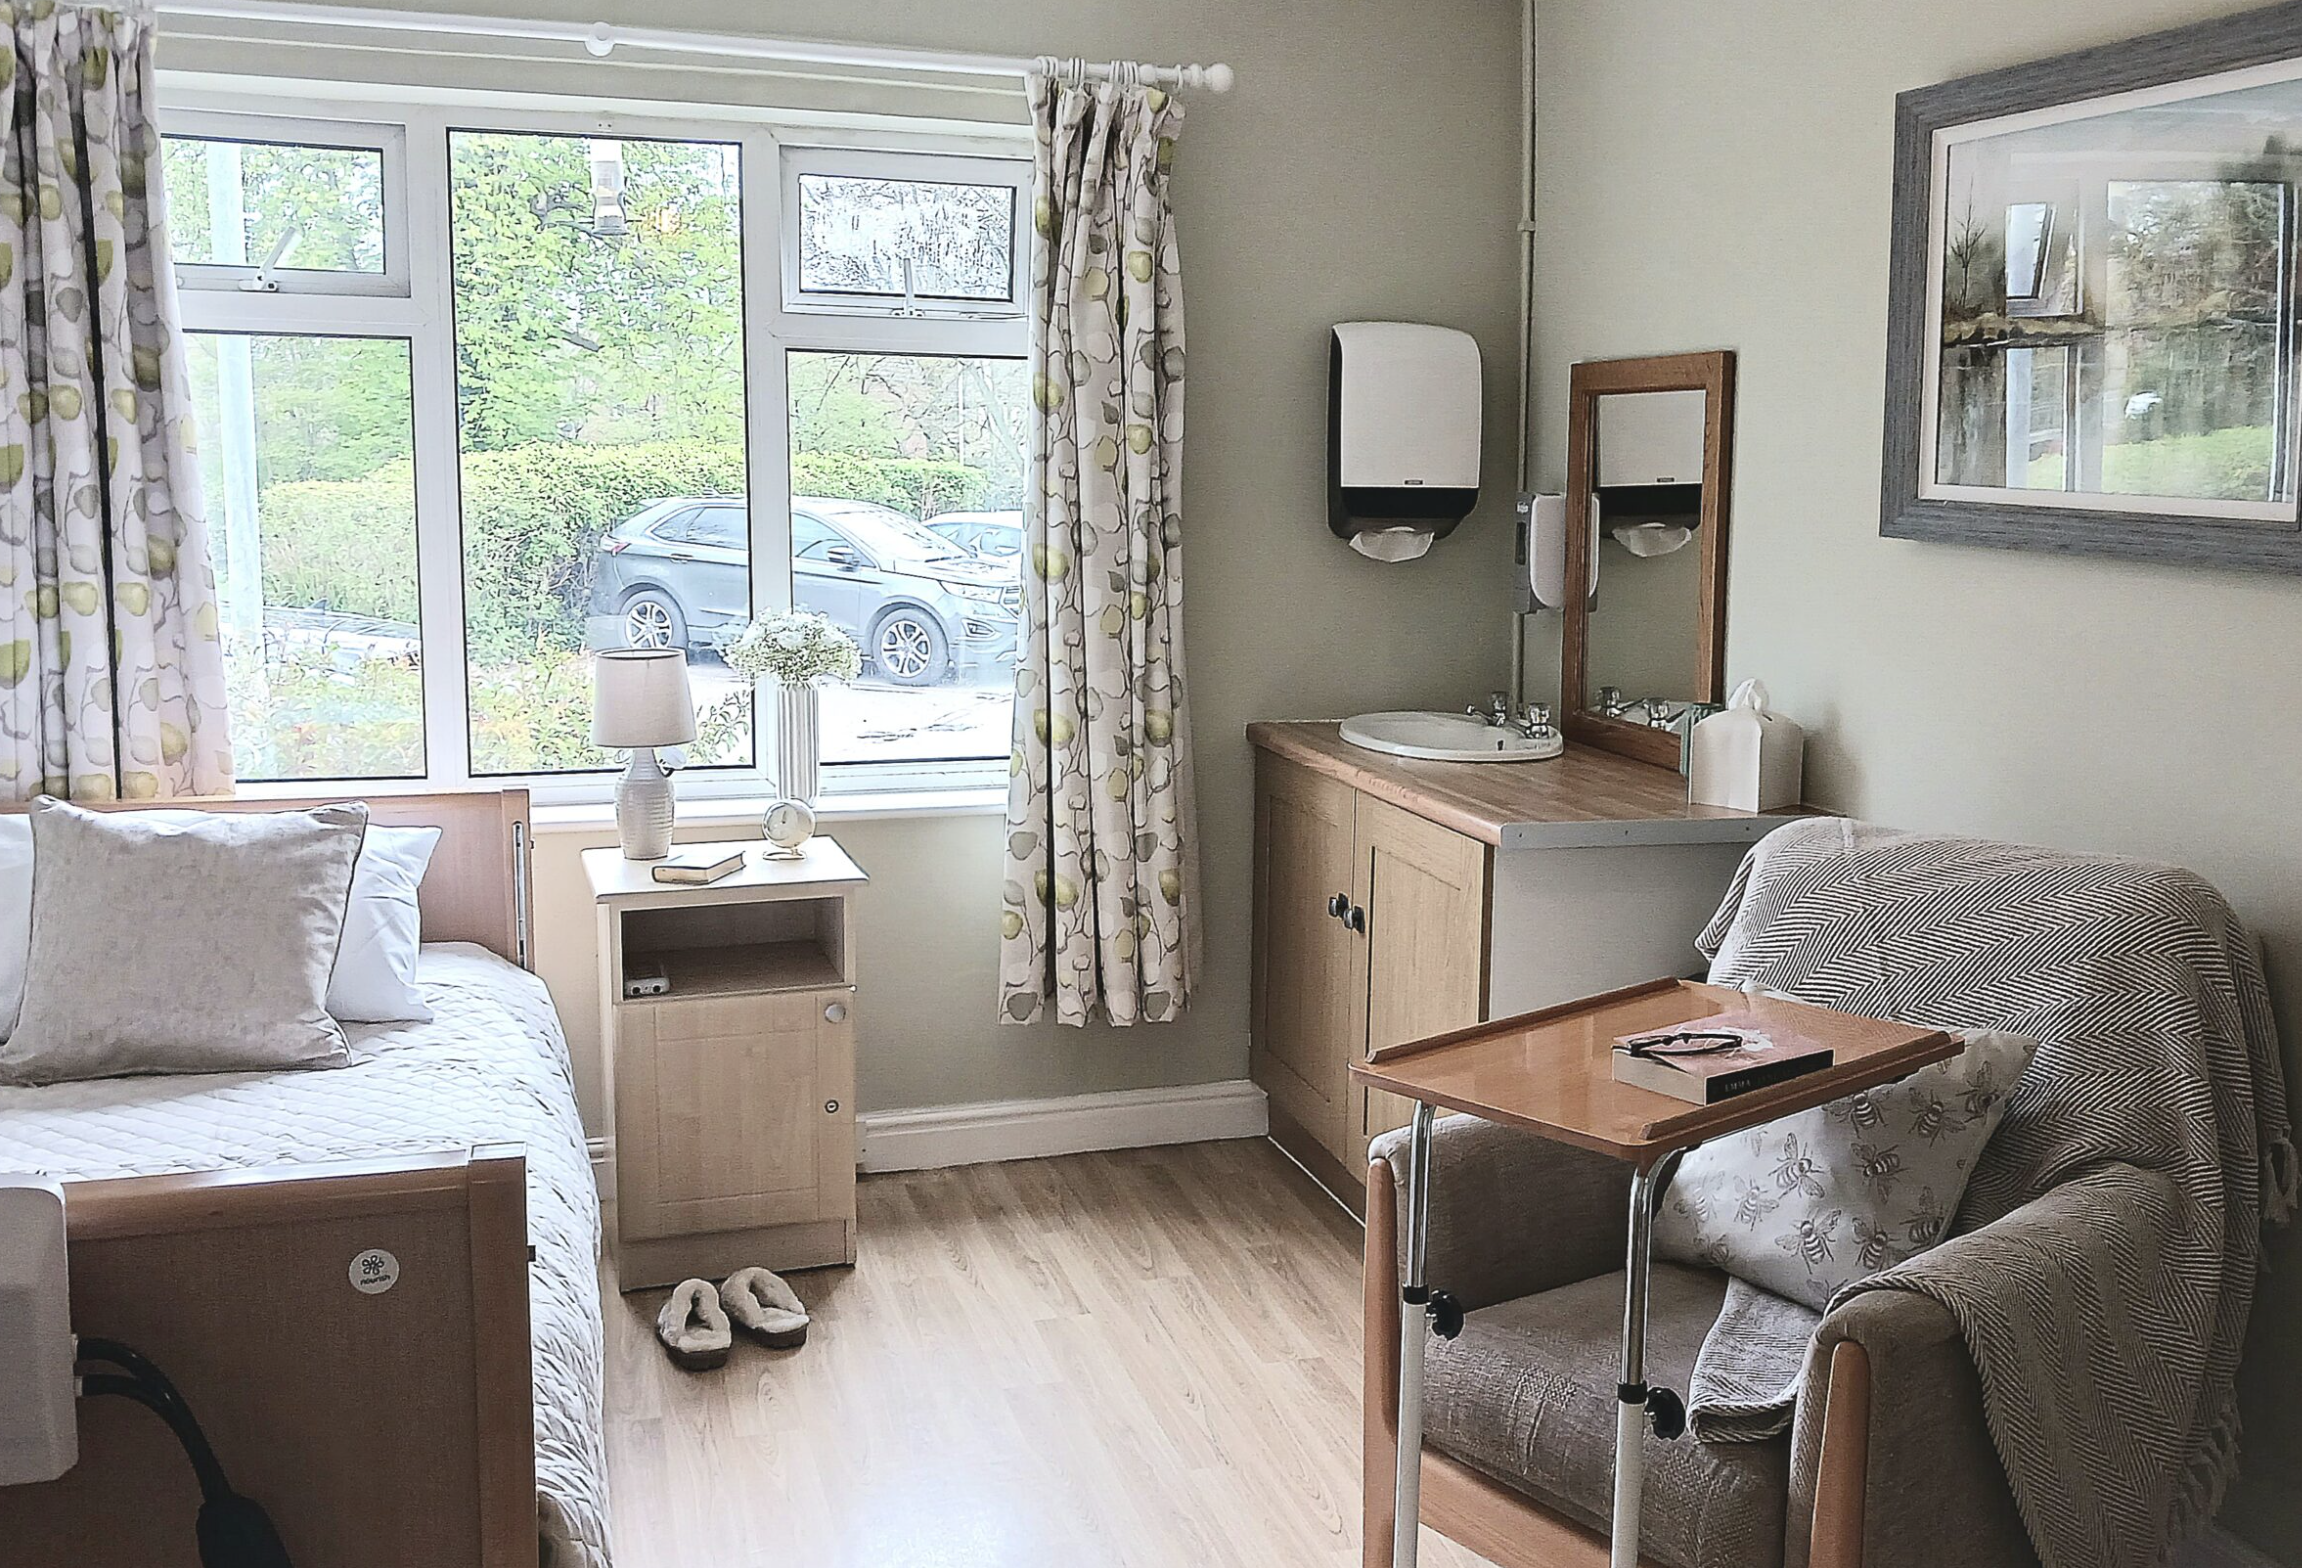 Bedroom of Kingfisher care home in Cheshunt, Hertfordshire